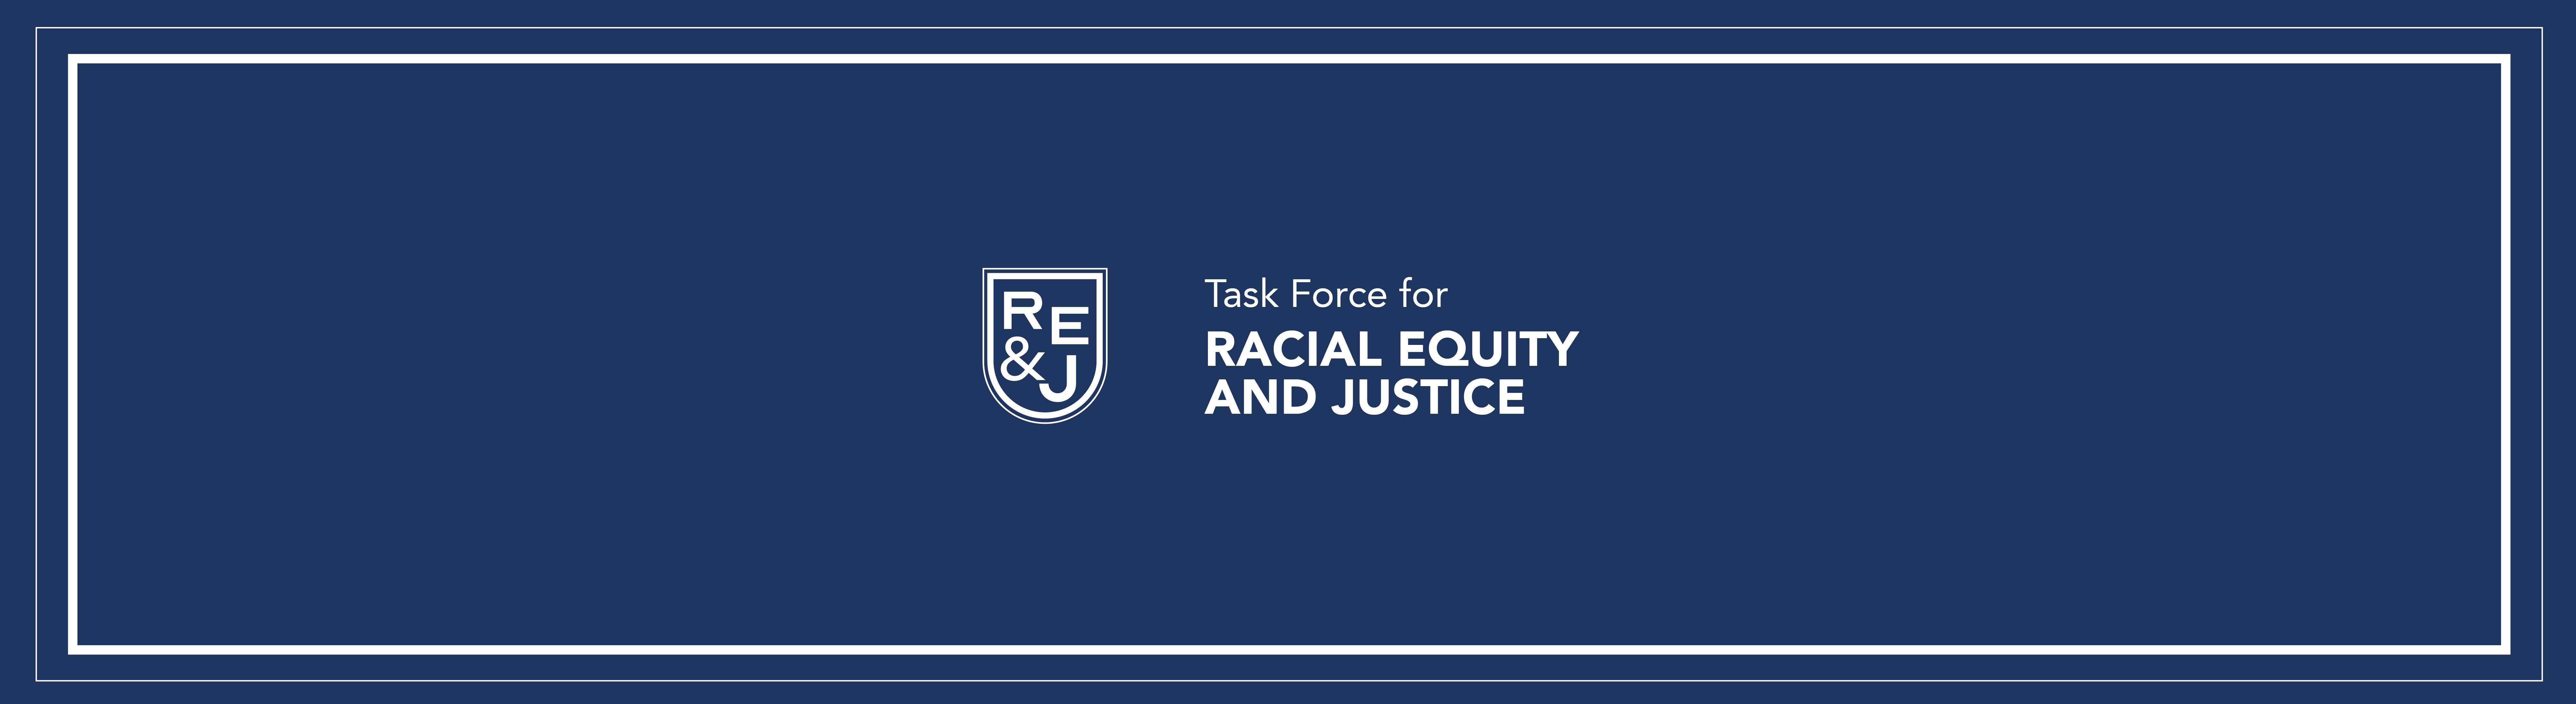 Racial Equity & Justice Task Force